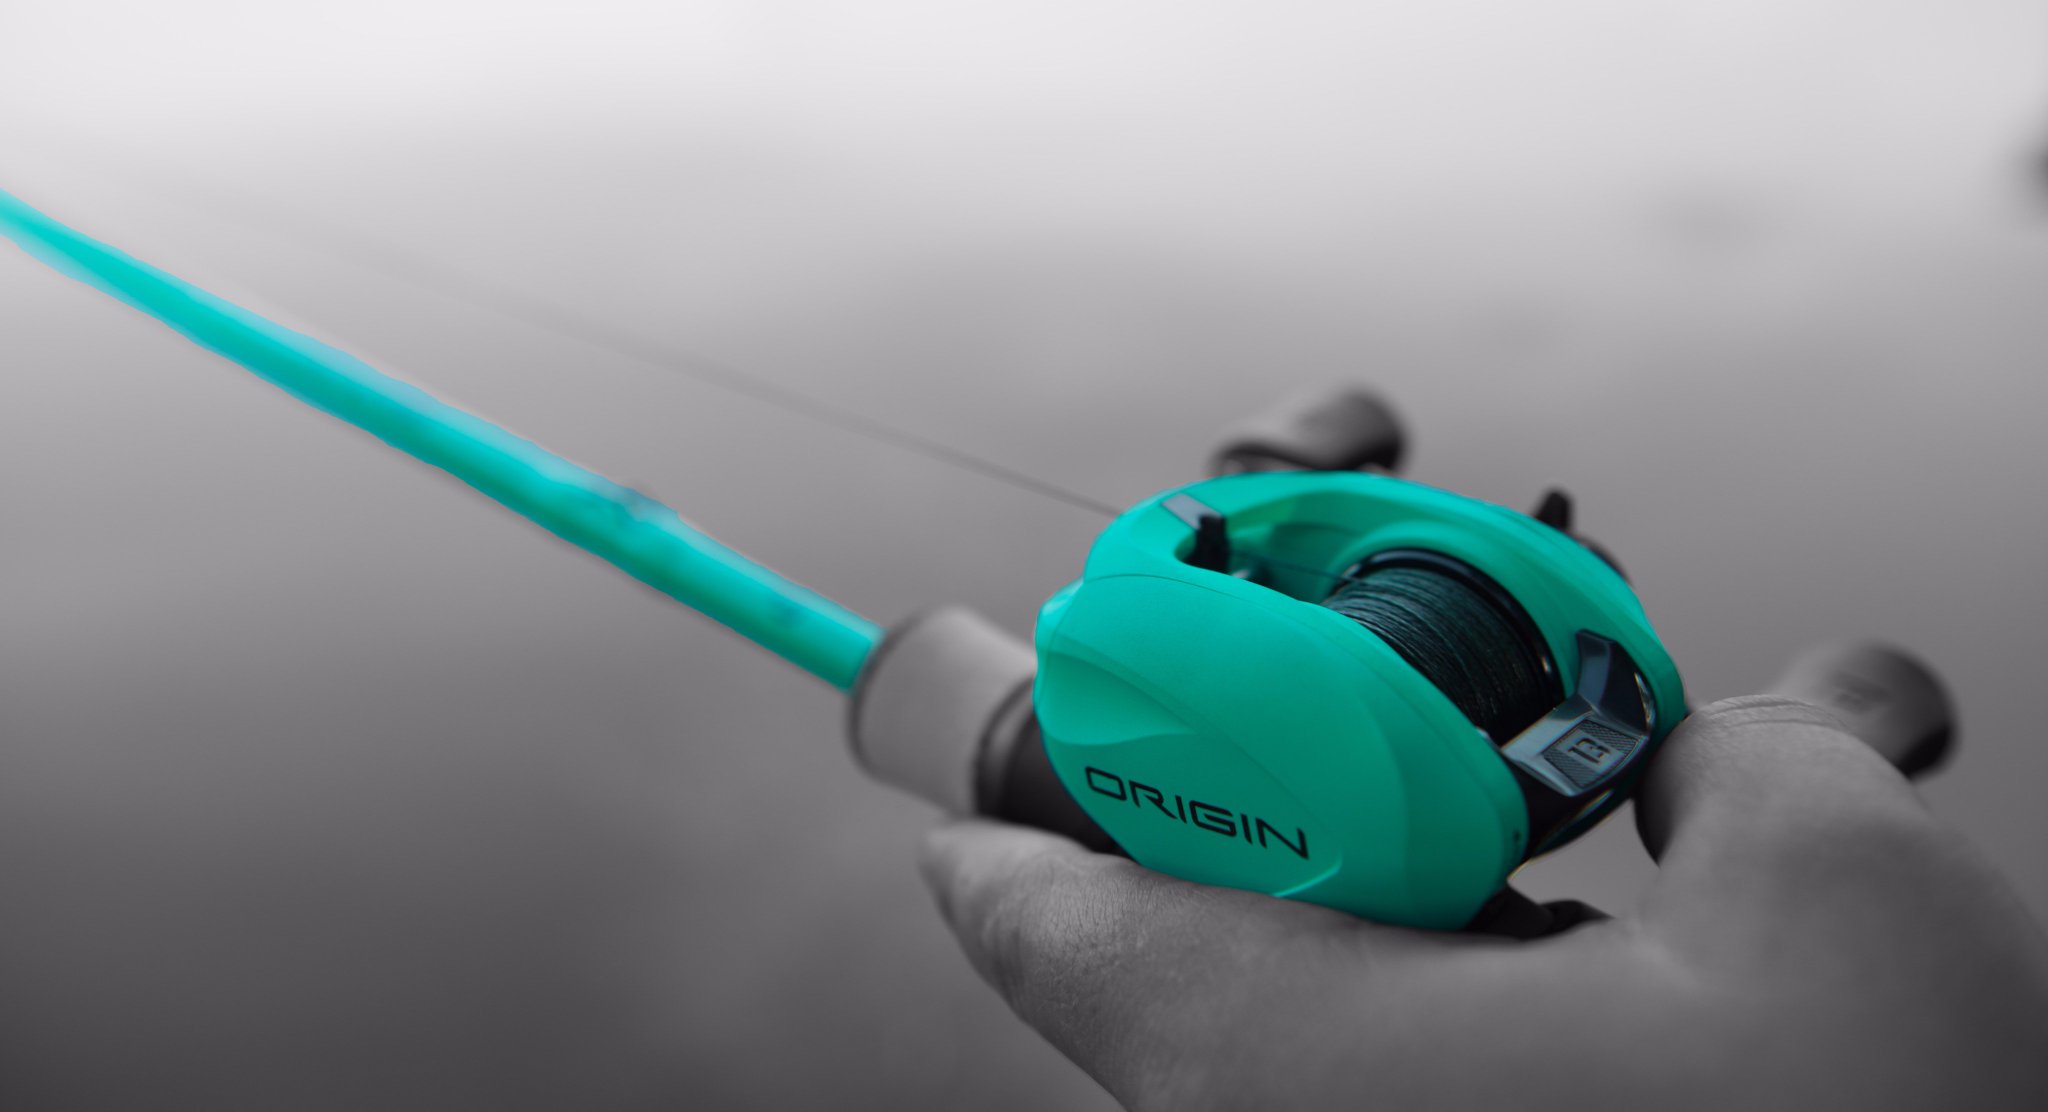 13fishing on X: Introducing the Origin TX and Fate Green. Coming